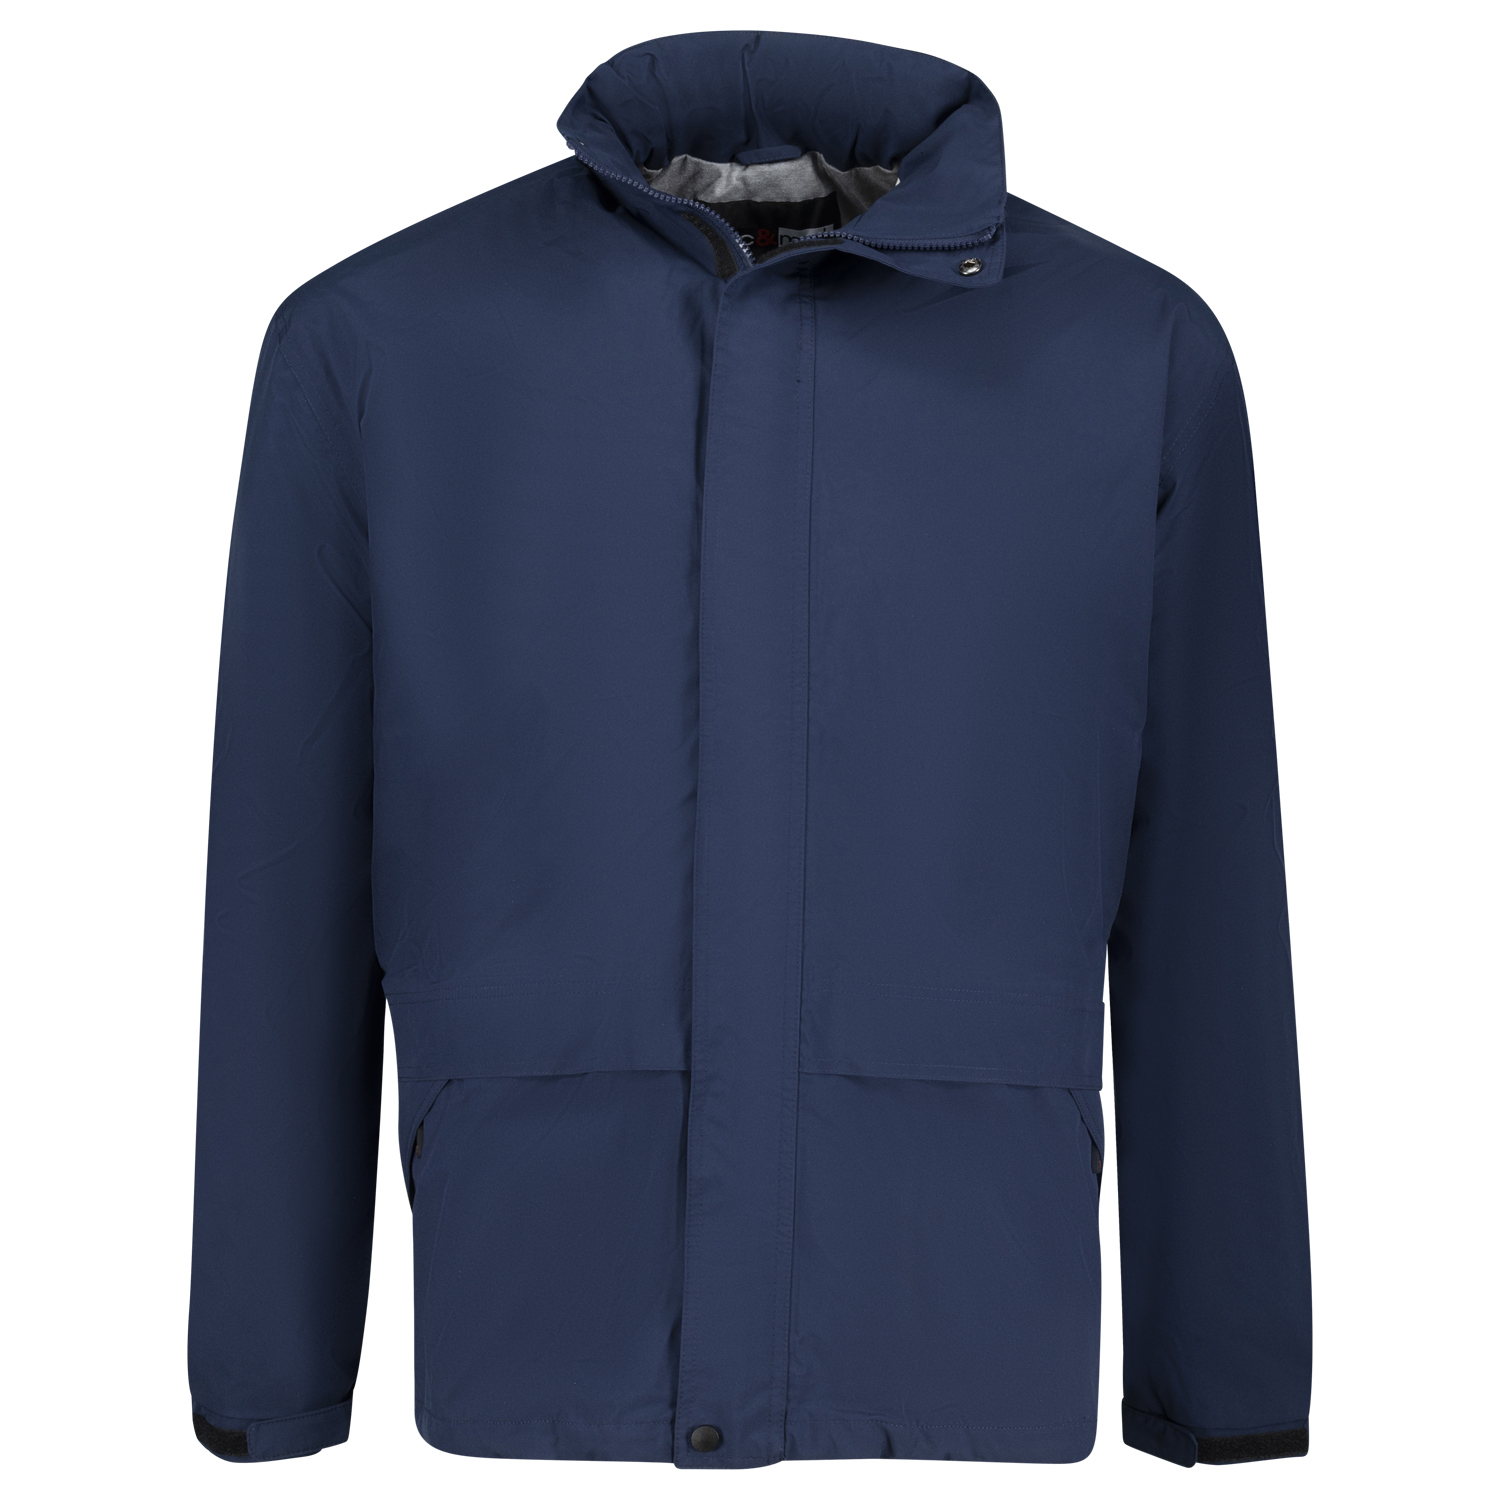 Darkblue wind and rain jacket from Abraxas in plus sizes up to 12XL